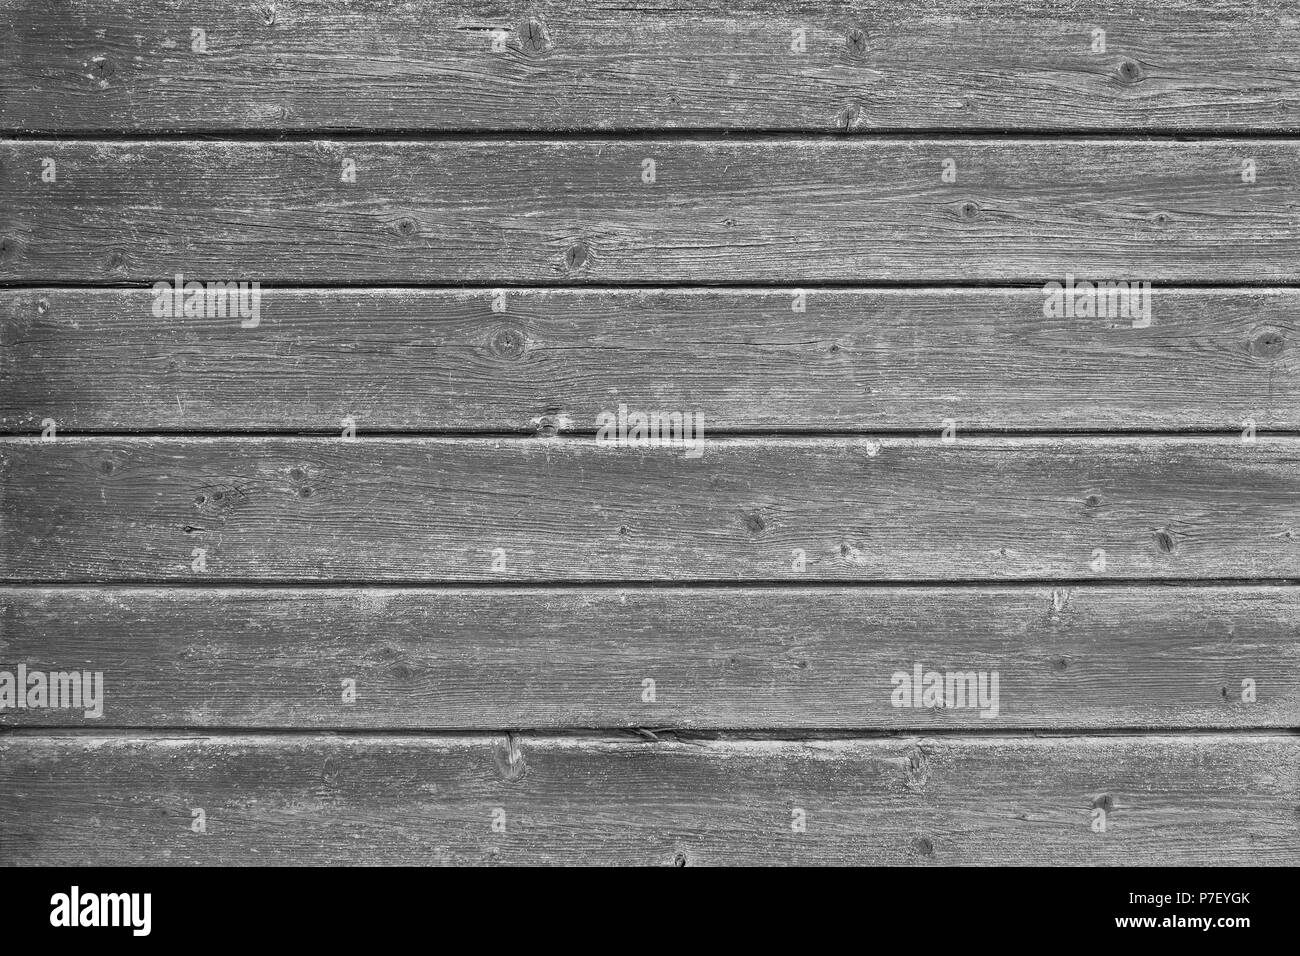 Full frame background of an old and faded wood board wall in black and white Stock Photo